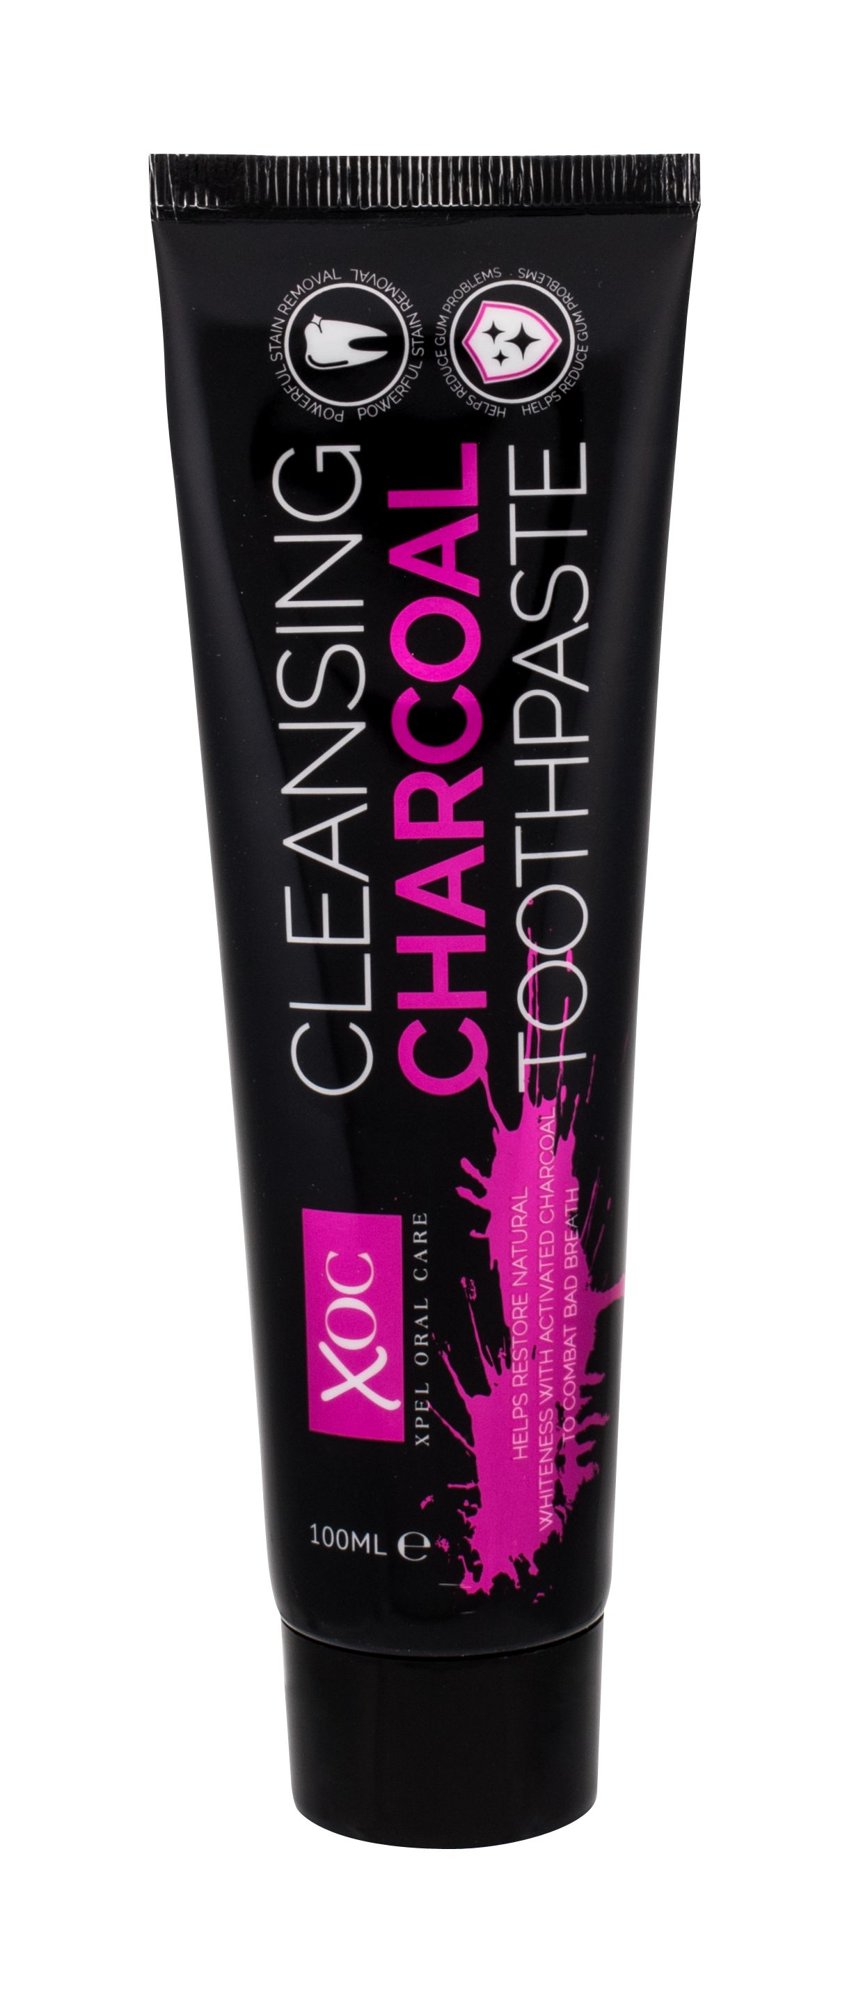 Xpel Oral Care Cleansing Charcoal Toothpaste